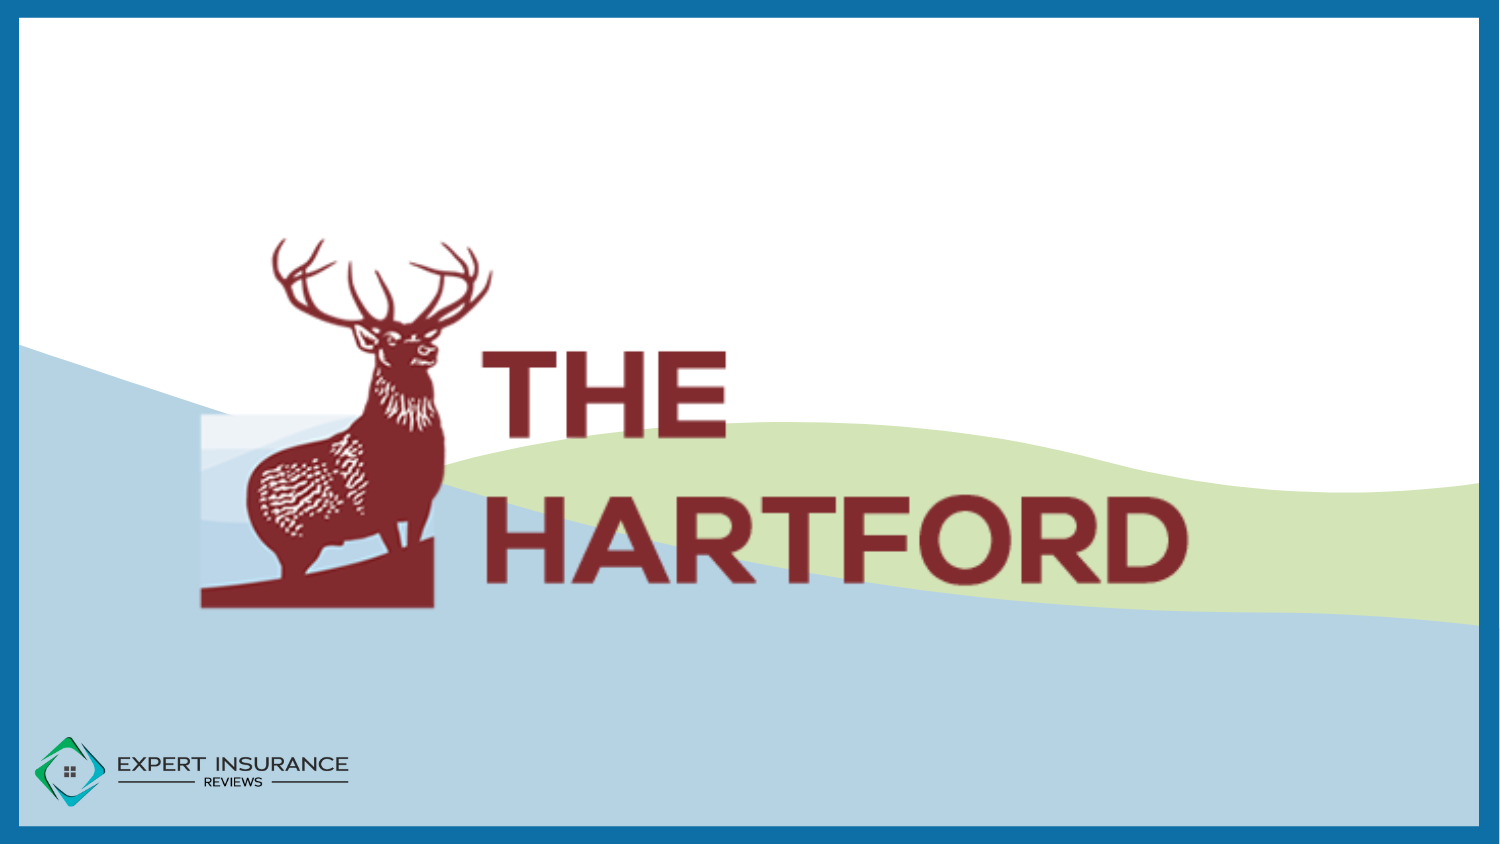 Best Acupuncturists That Accept Medicare: The Hartford